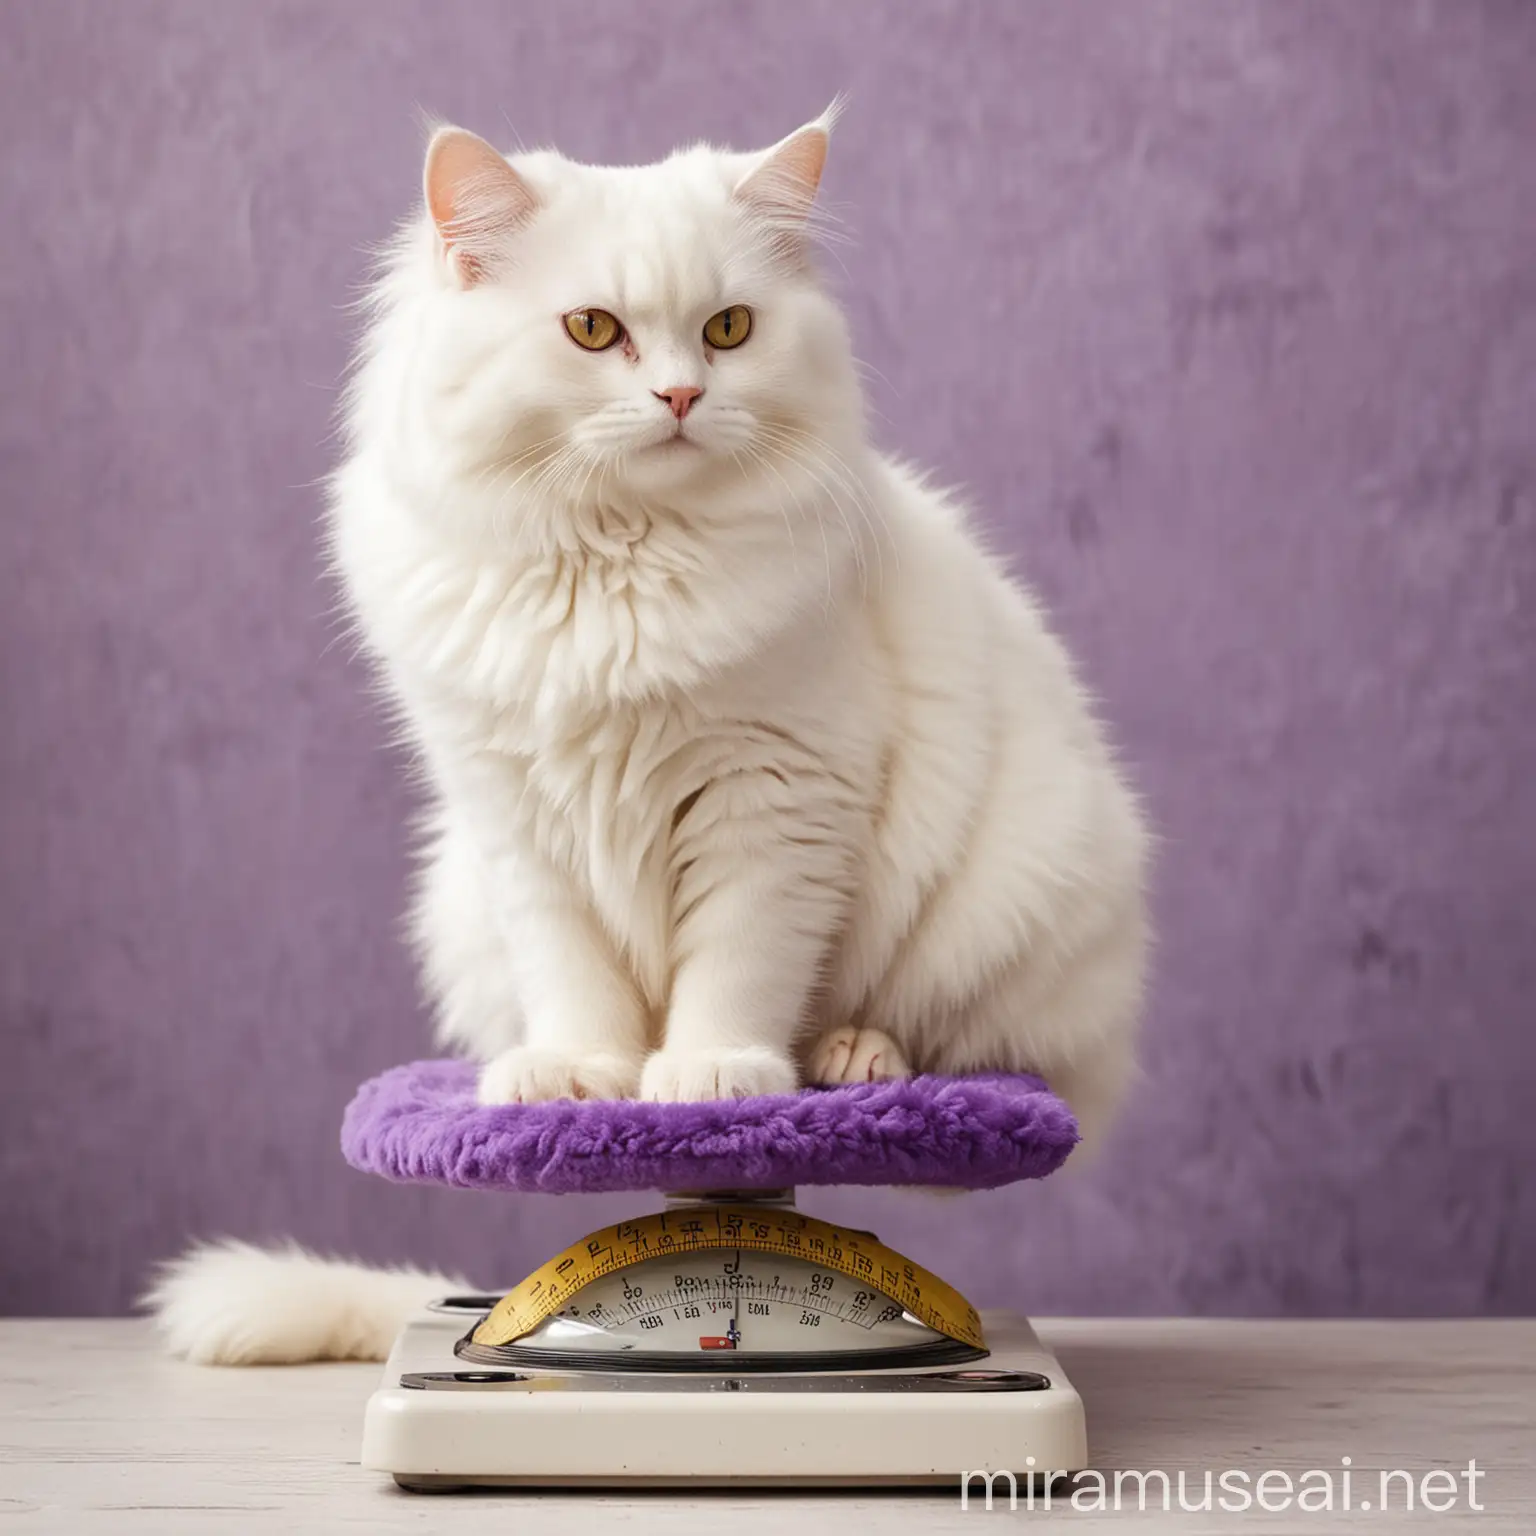 Fluffy White Cat Sitting on Scales with Purple and Yellow Tones